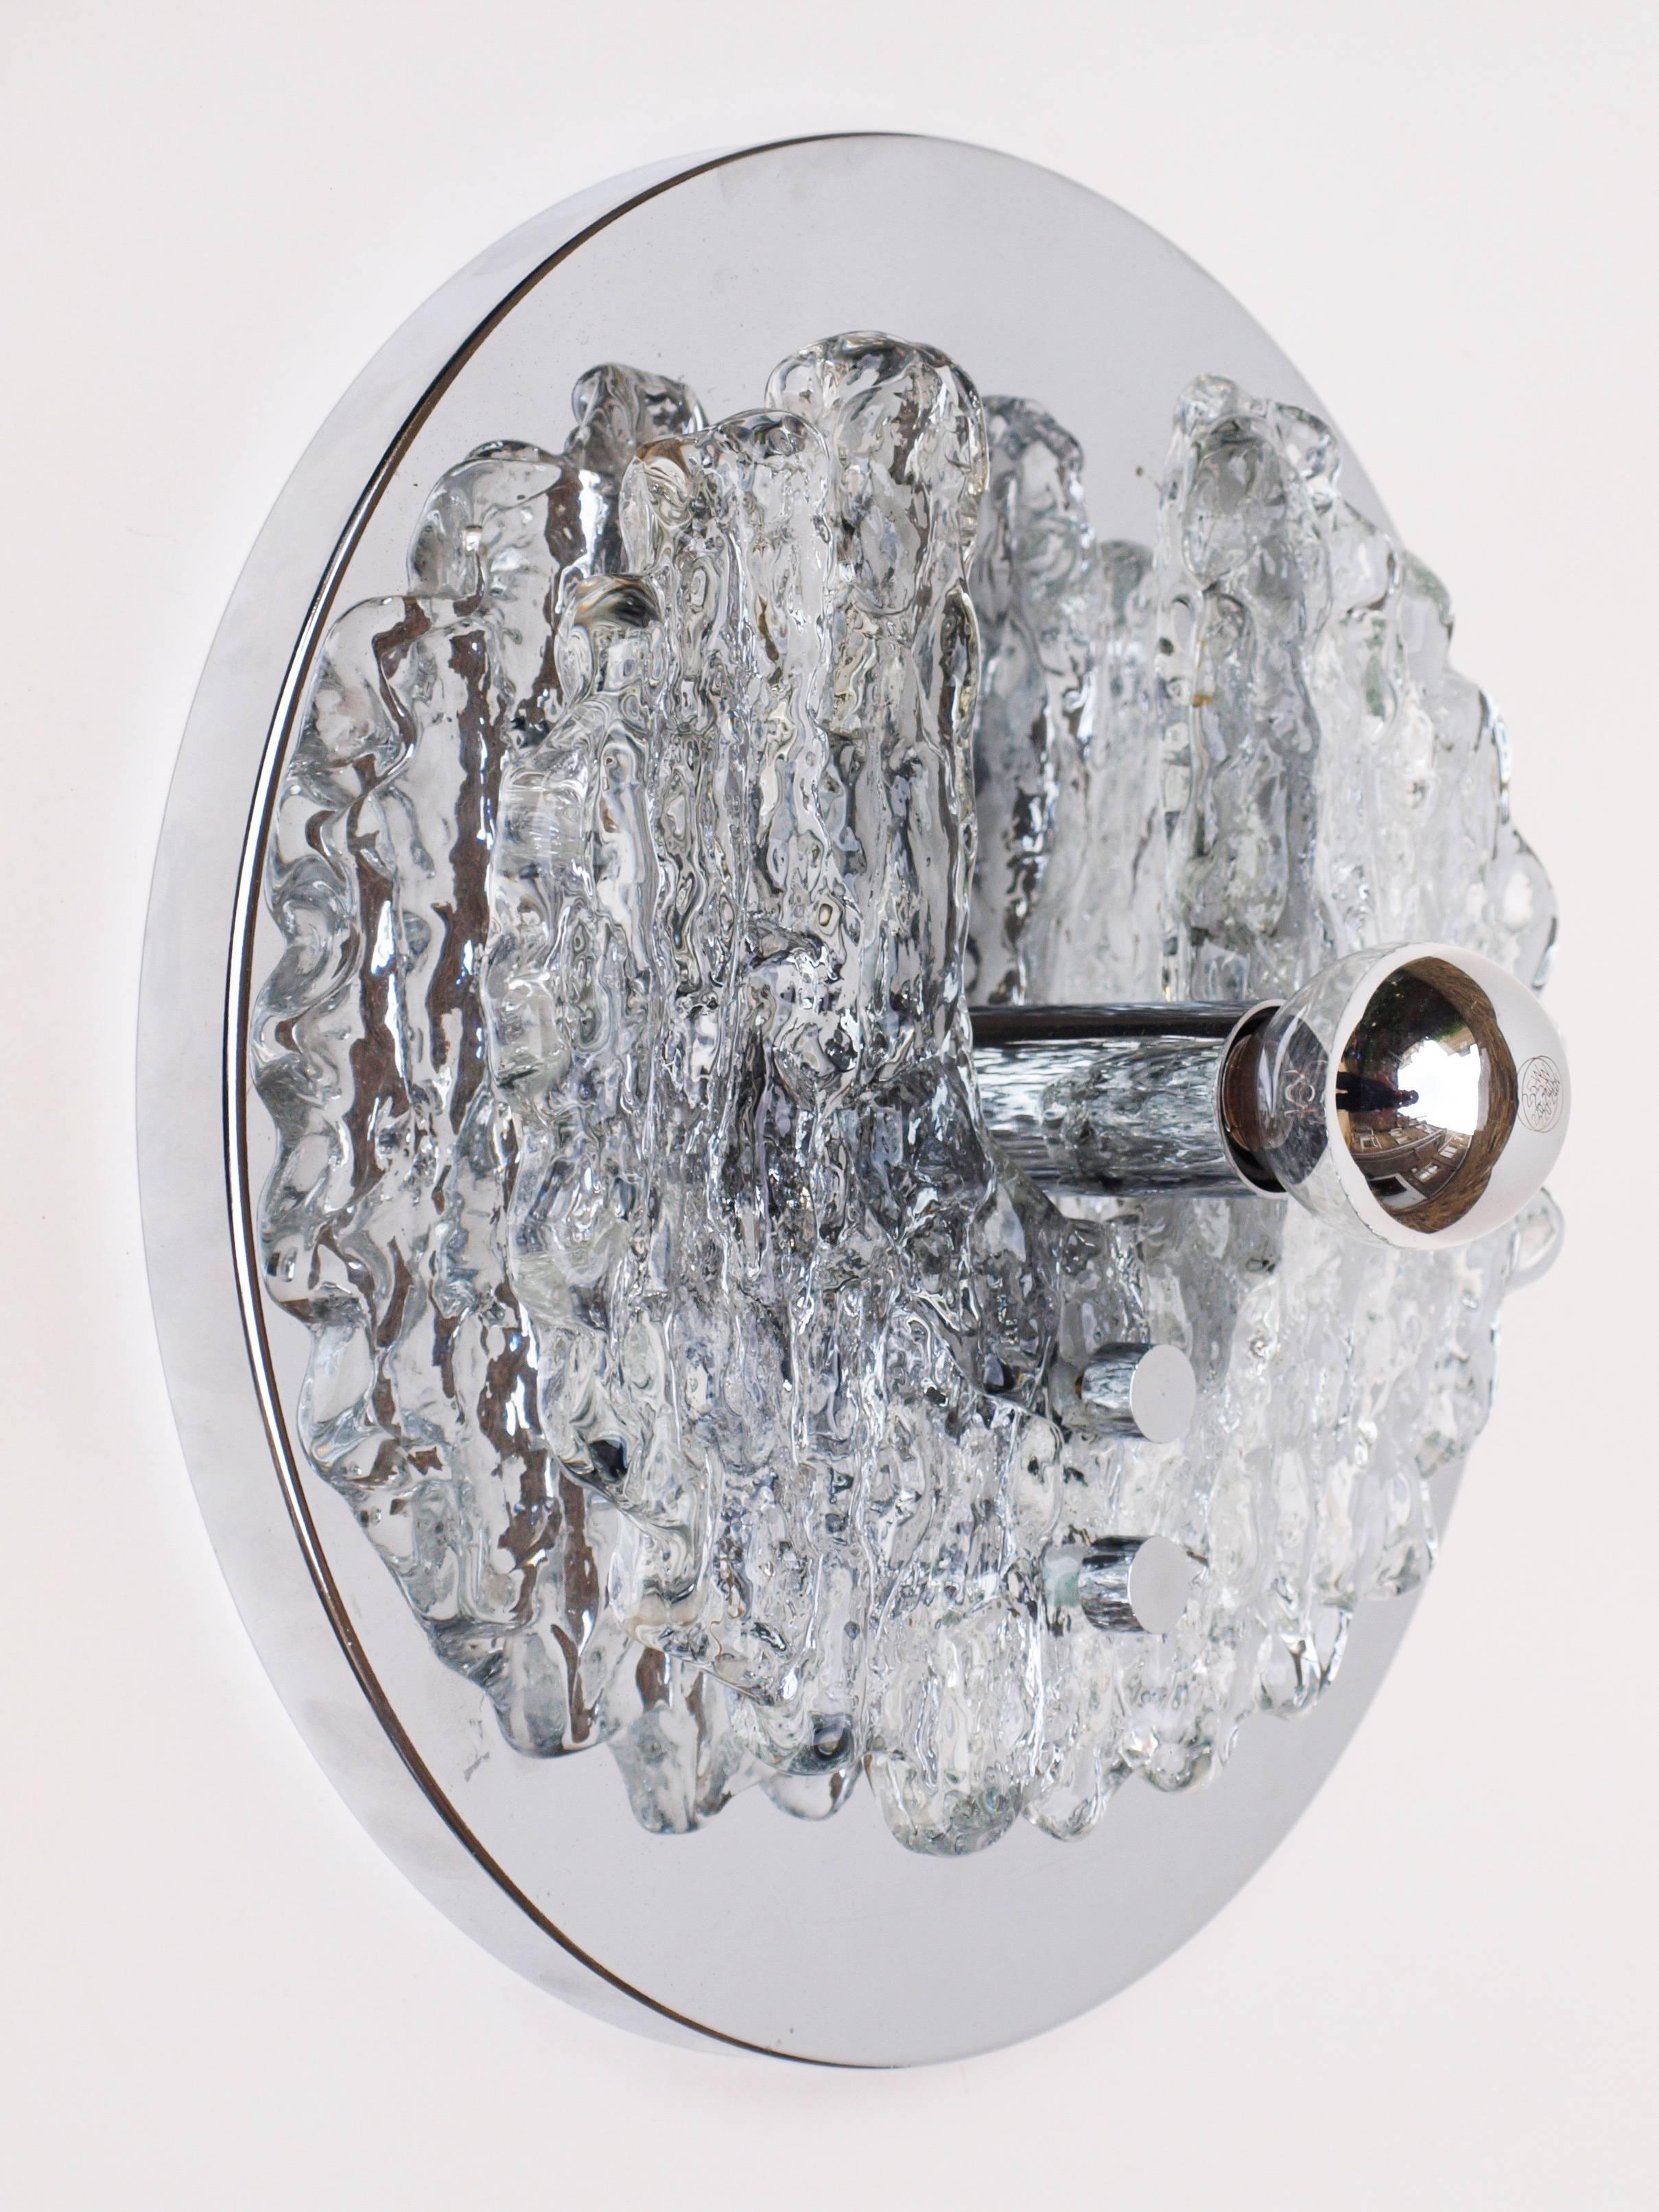 These stunning Murano Fabbian wall lights unite an irregular icicle-like hunk of Murano glass with a smooth disk of chrome-plated steel. The pair would sit beautifully in a hallway, living room or either side of a bed.

 